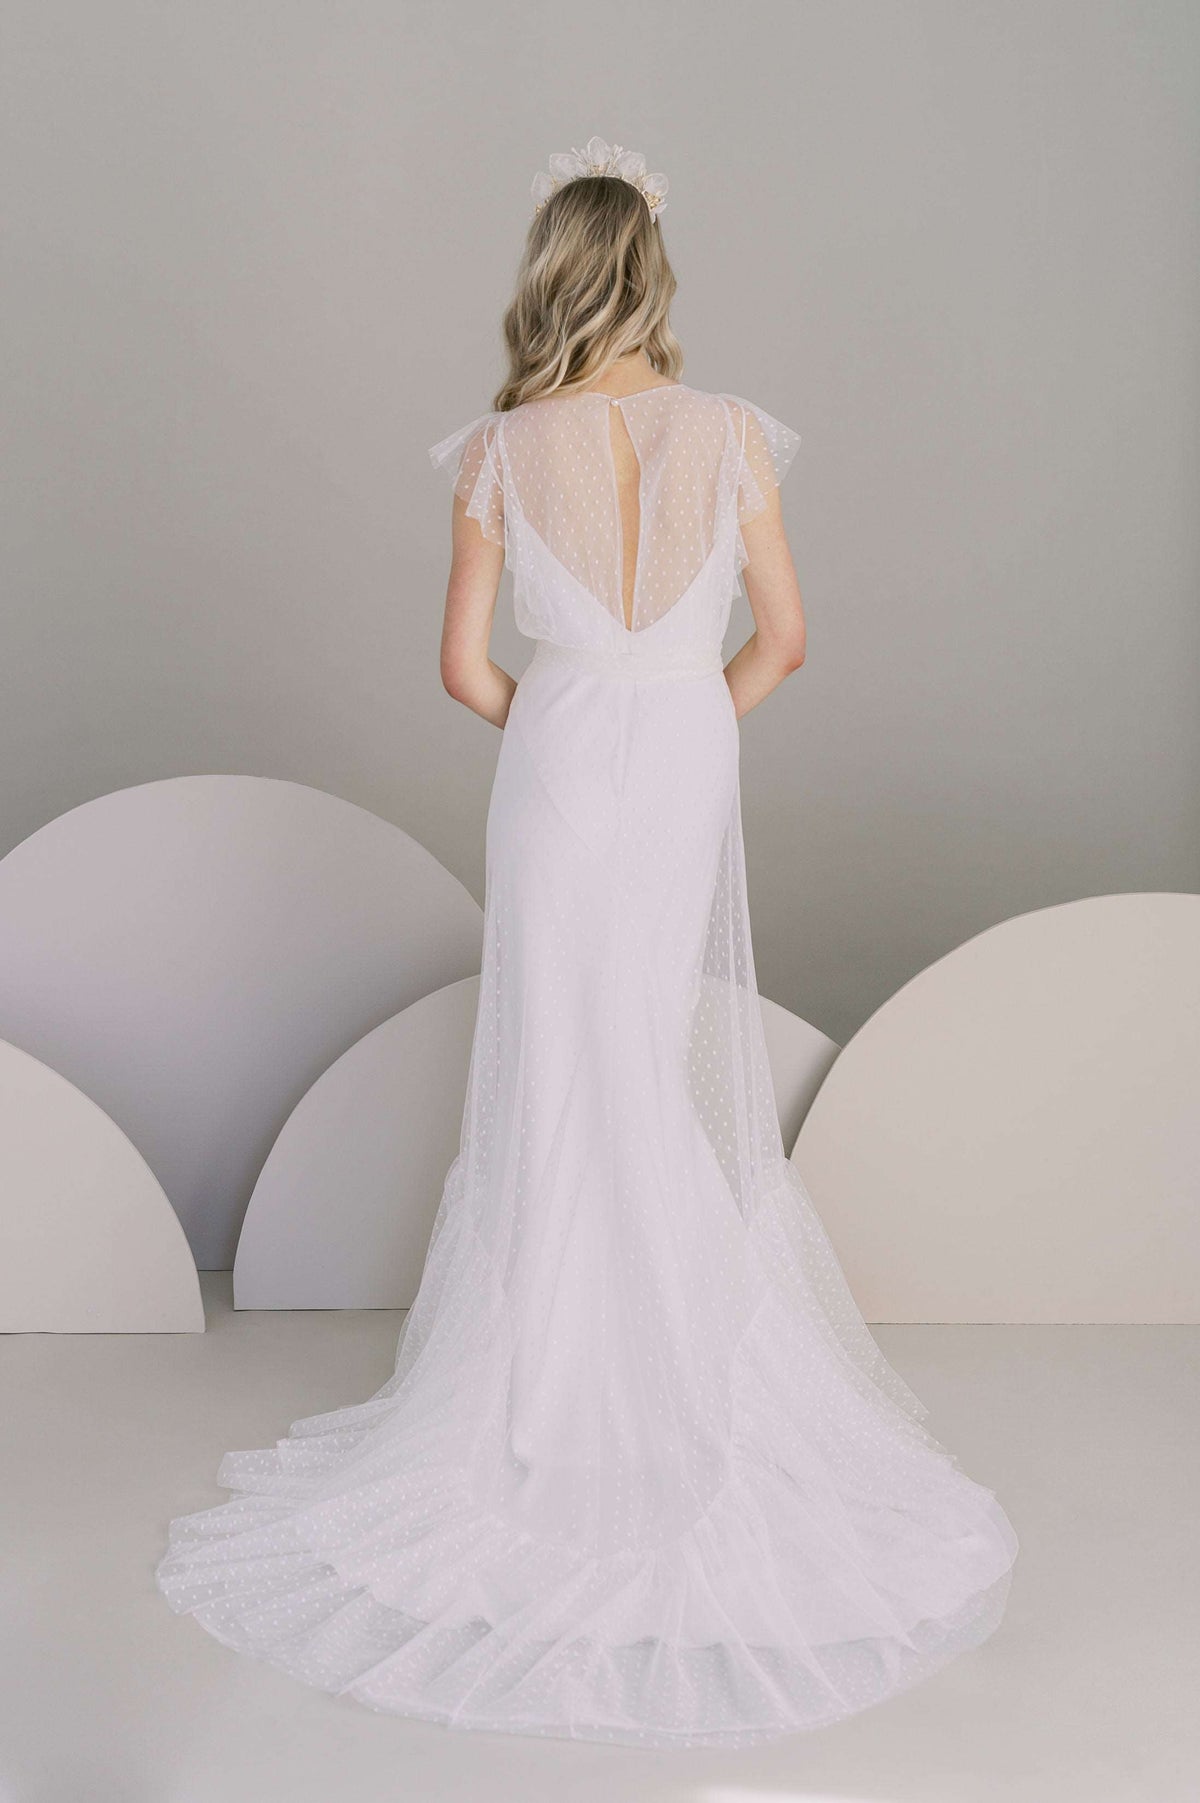 Nostalgic and romantic dot tulle wedding dress. Shown with a simple slip dress lining. Designed by Catherine Langlois, Canada.